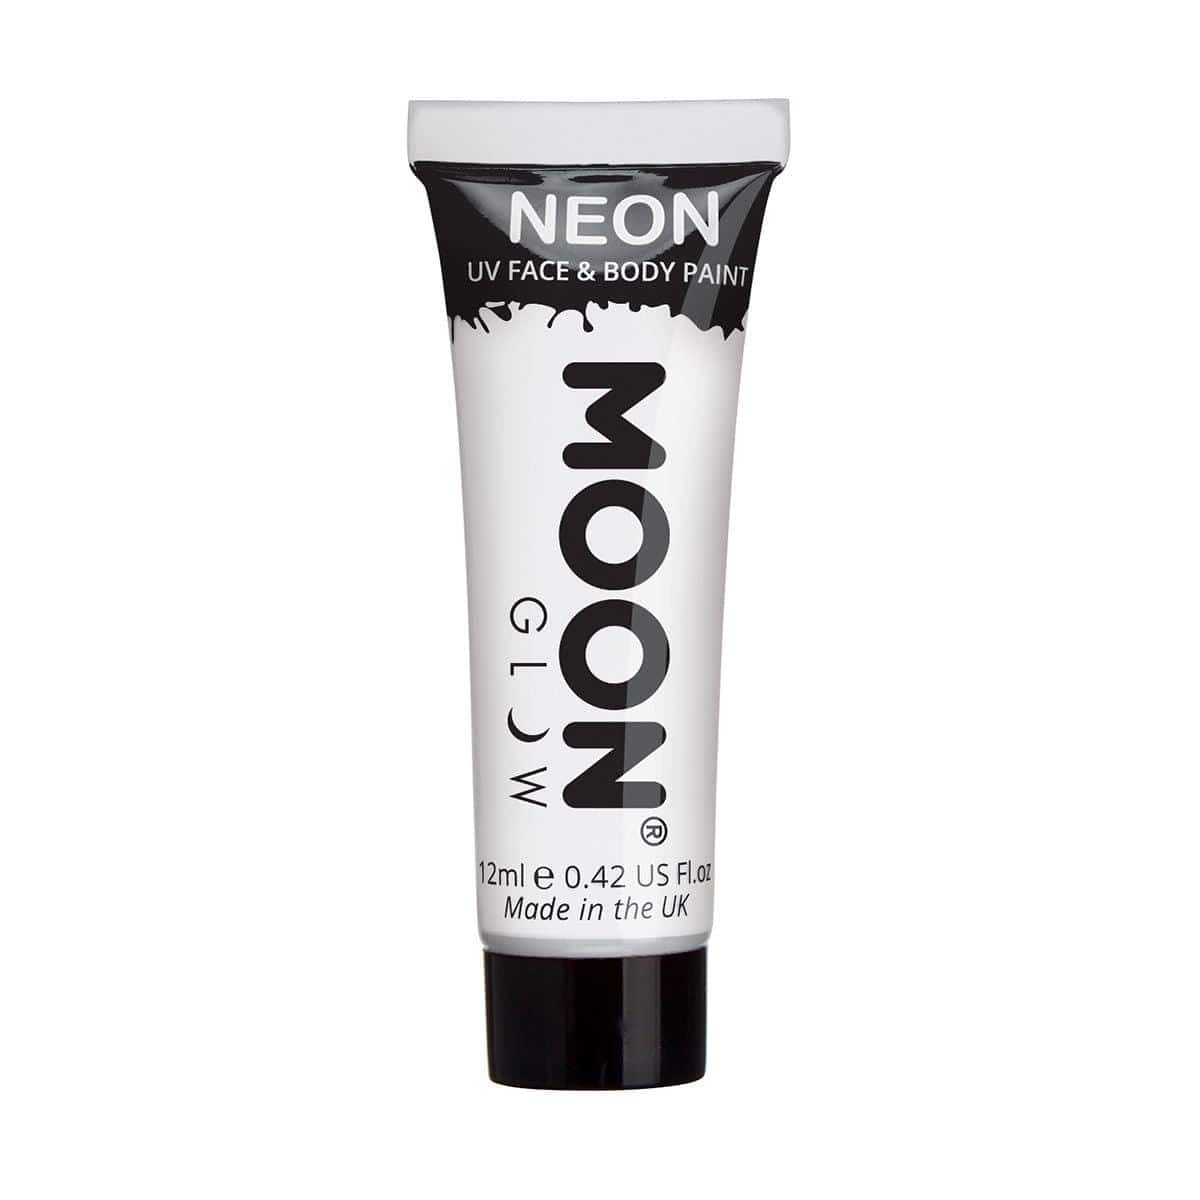 Buy Costume Accessories Moon white neon UV face & body paint sold at Party Expert